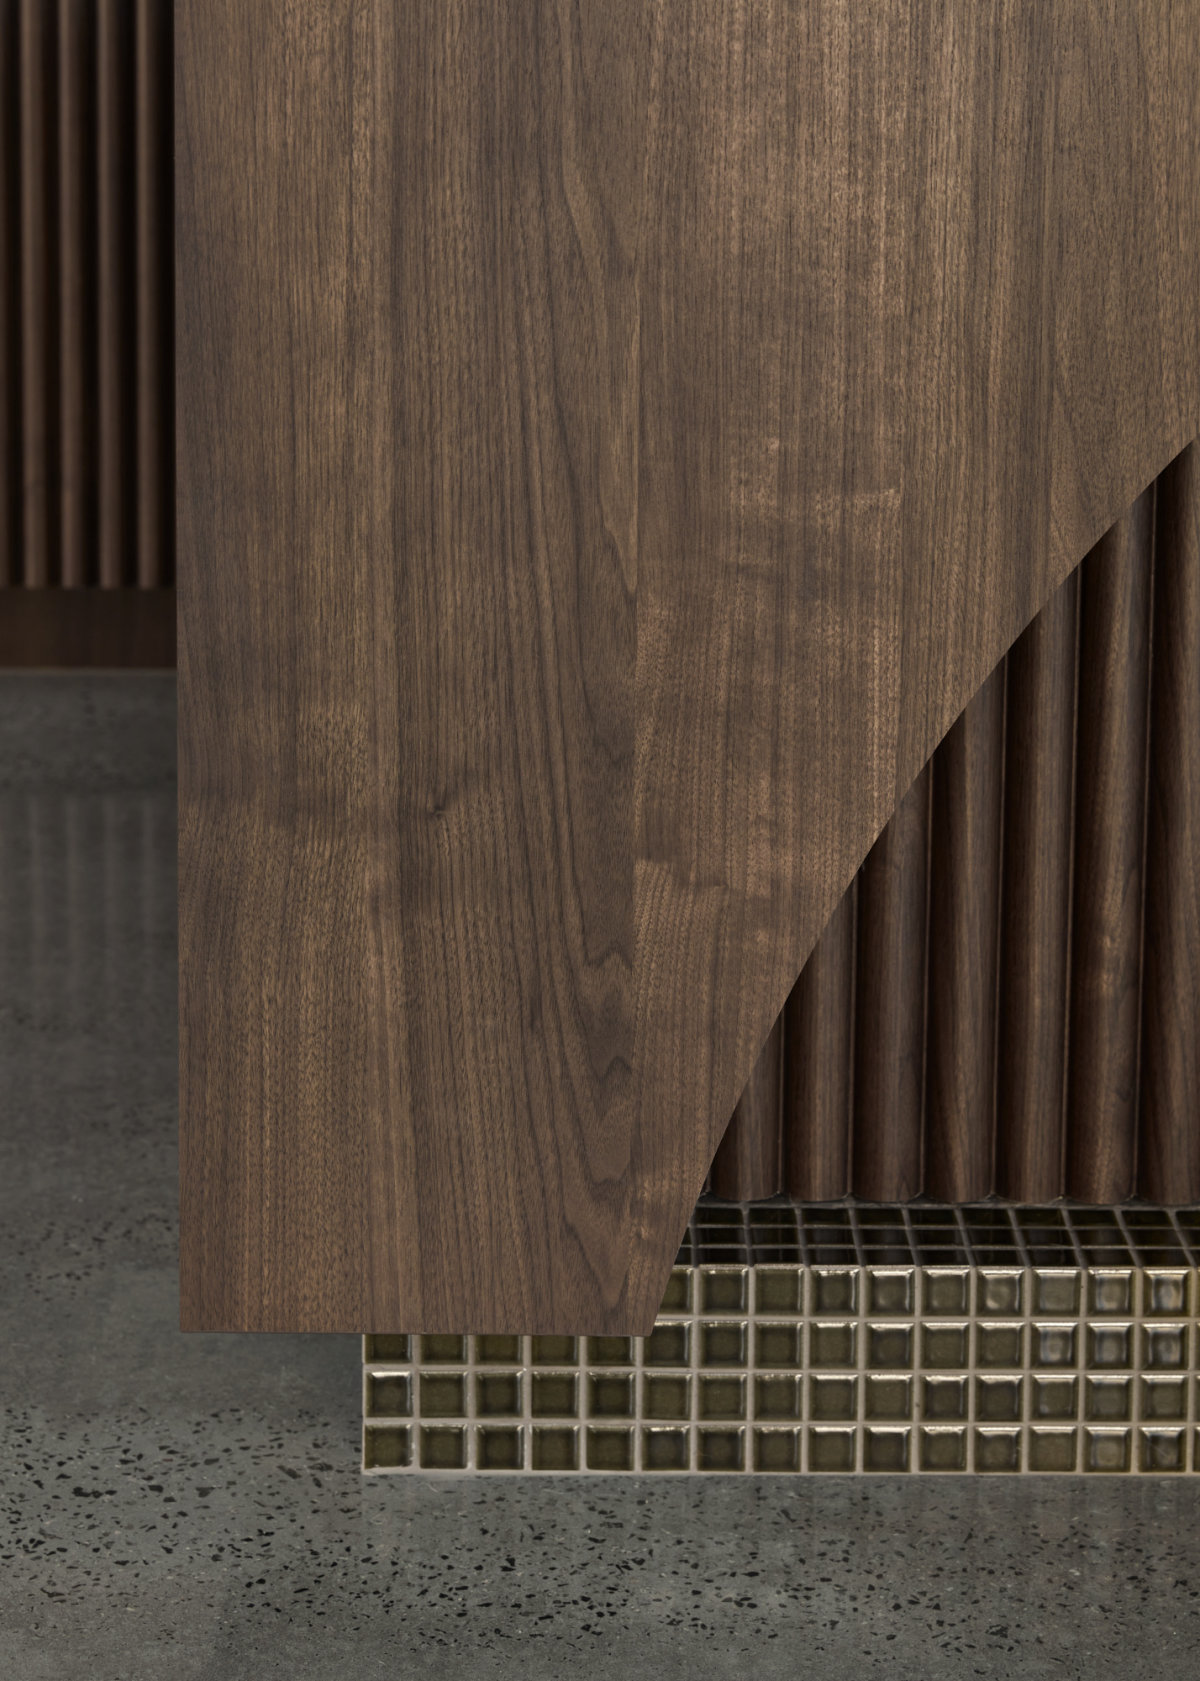 Close-up of details on the base of the kitchen bench. A curved timber panel overlays an accordion-like wooden surface. Dark olive tiles line the base of the bench.